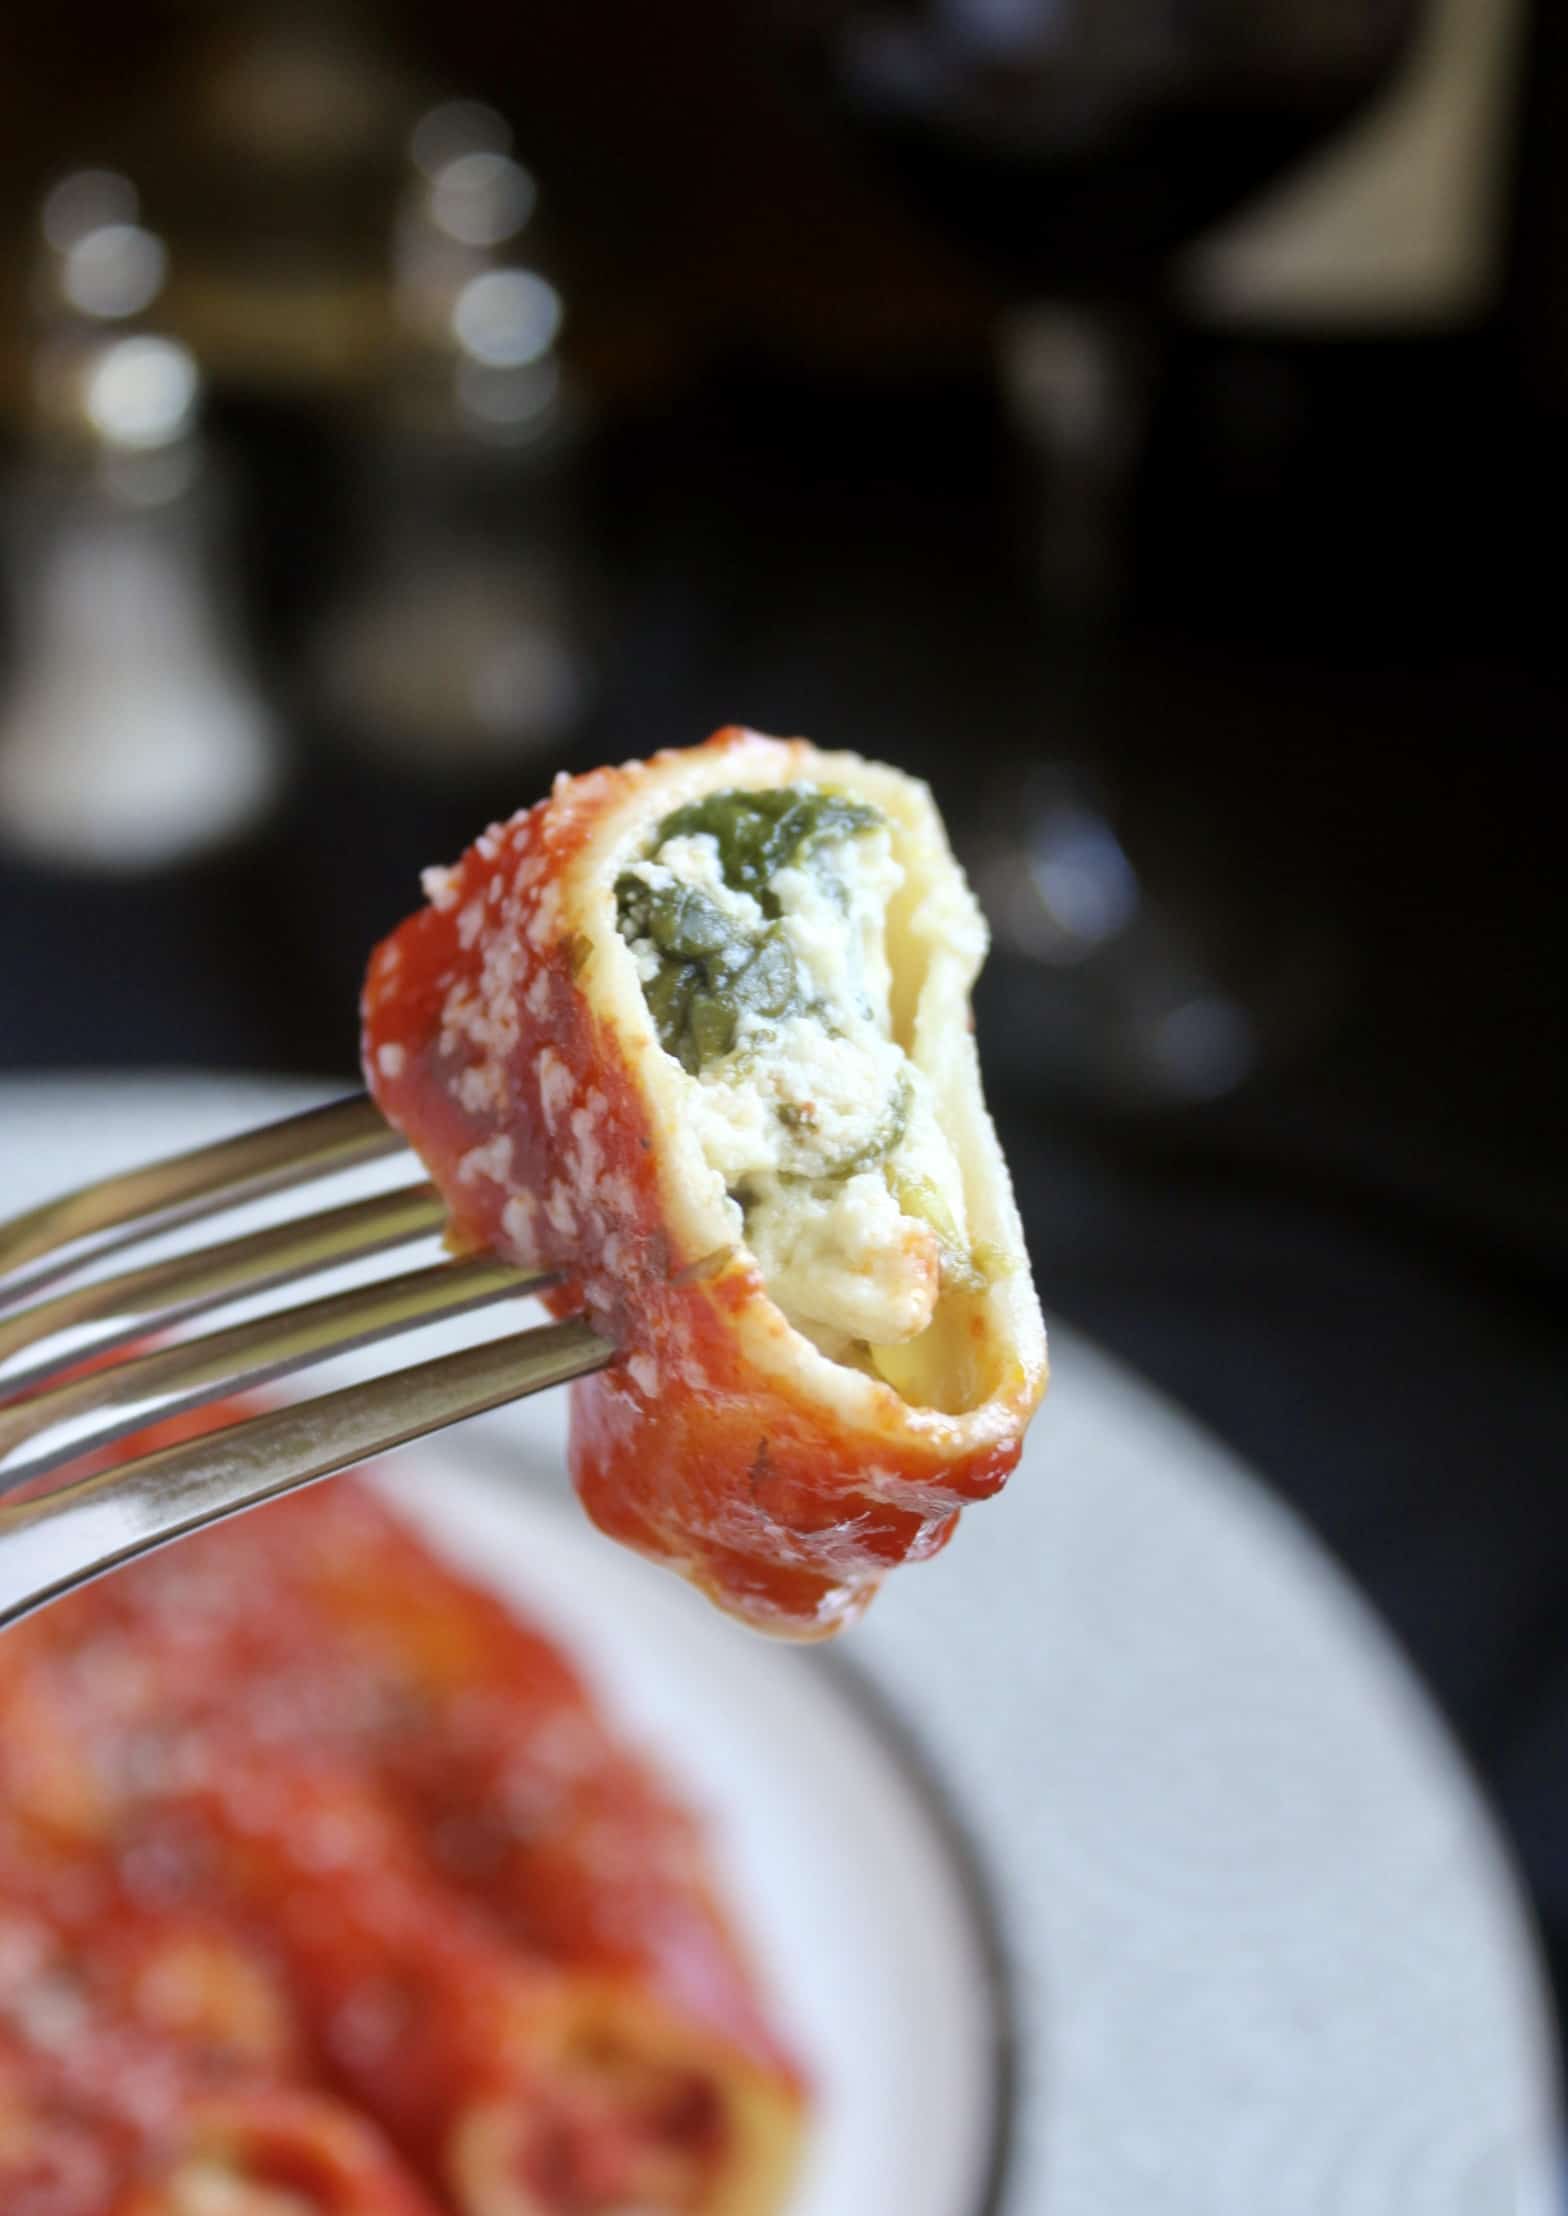 piece manicotti on a fork showing filling